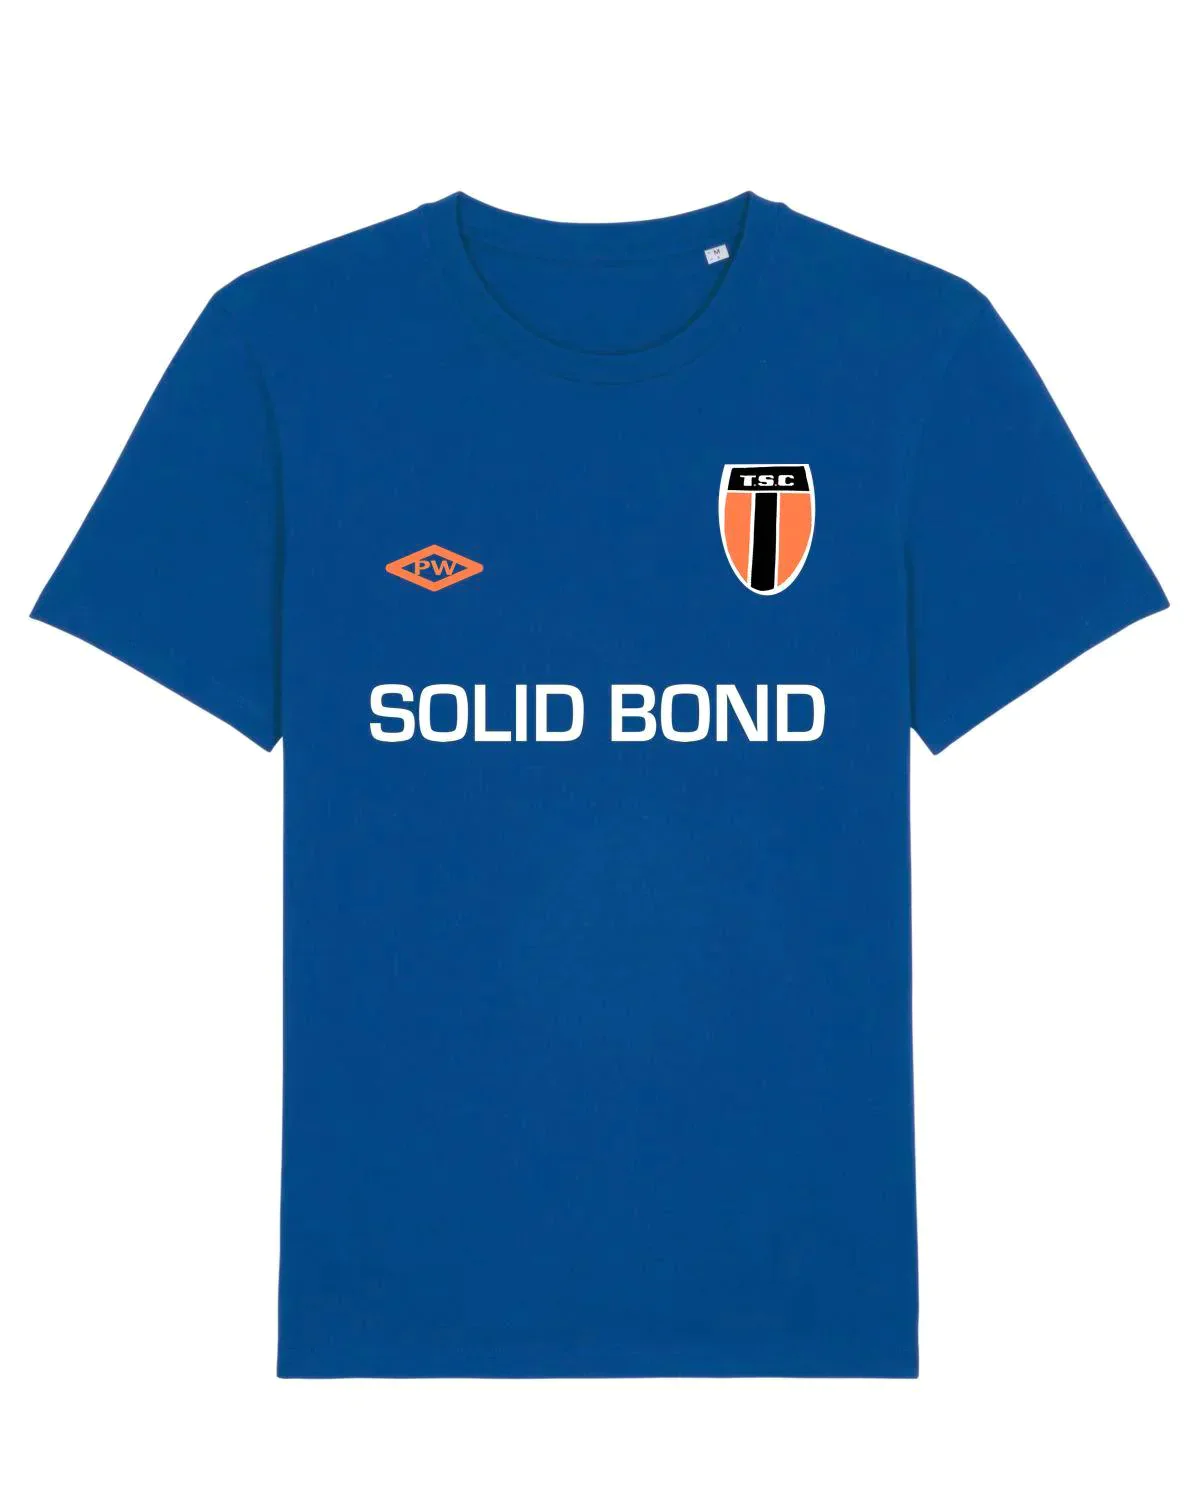 SOLID BOND (Royal Blue): T-Shirt Inspired by The Style Council & Football